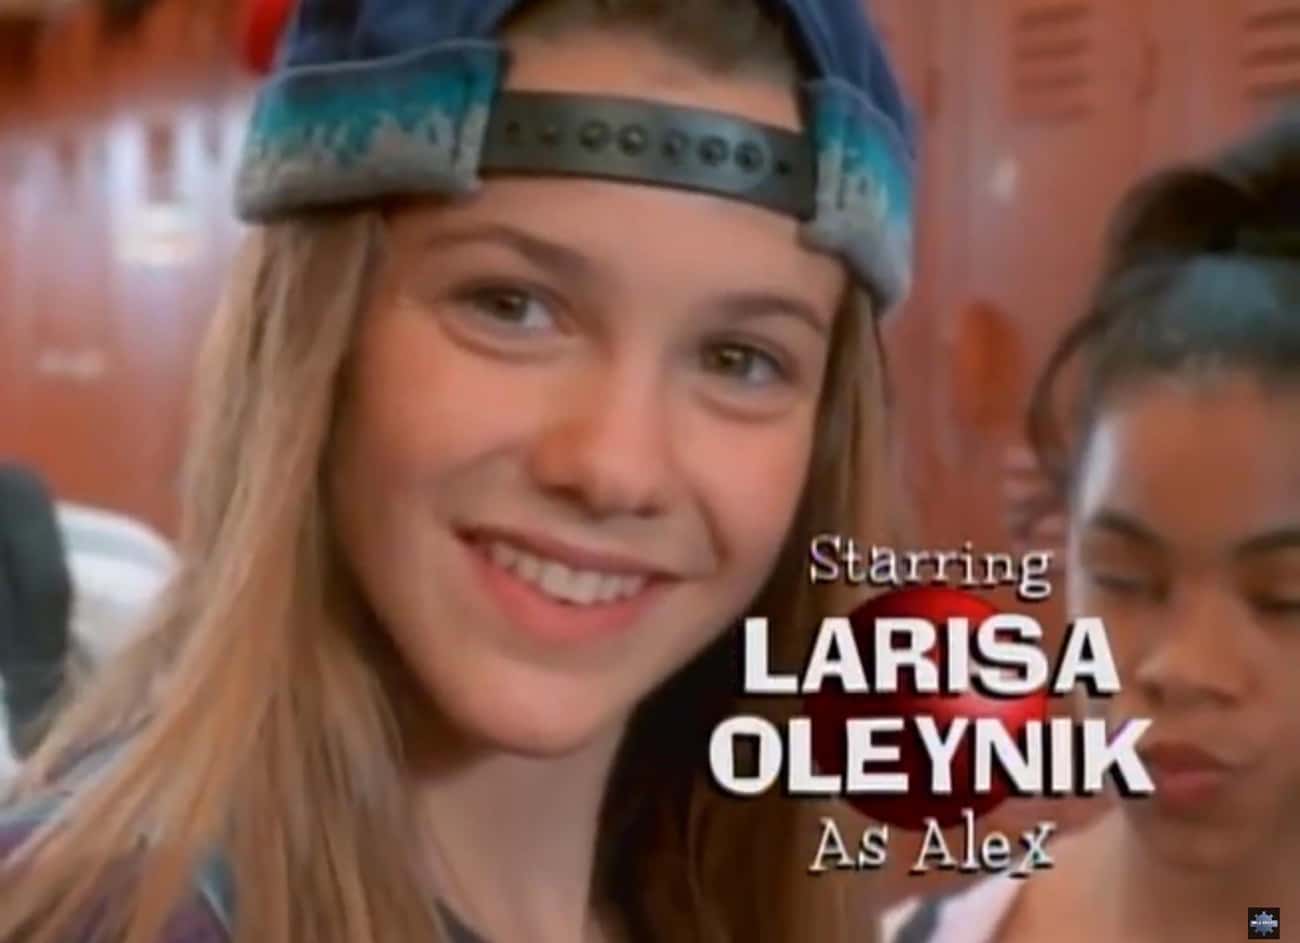 She Was Picked Out Of 400 Girls For The Title Role In 'The Secret Life Of Alex Mack'